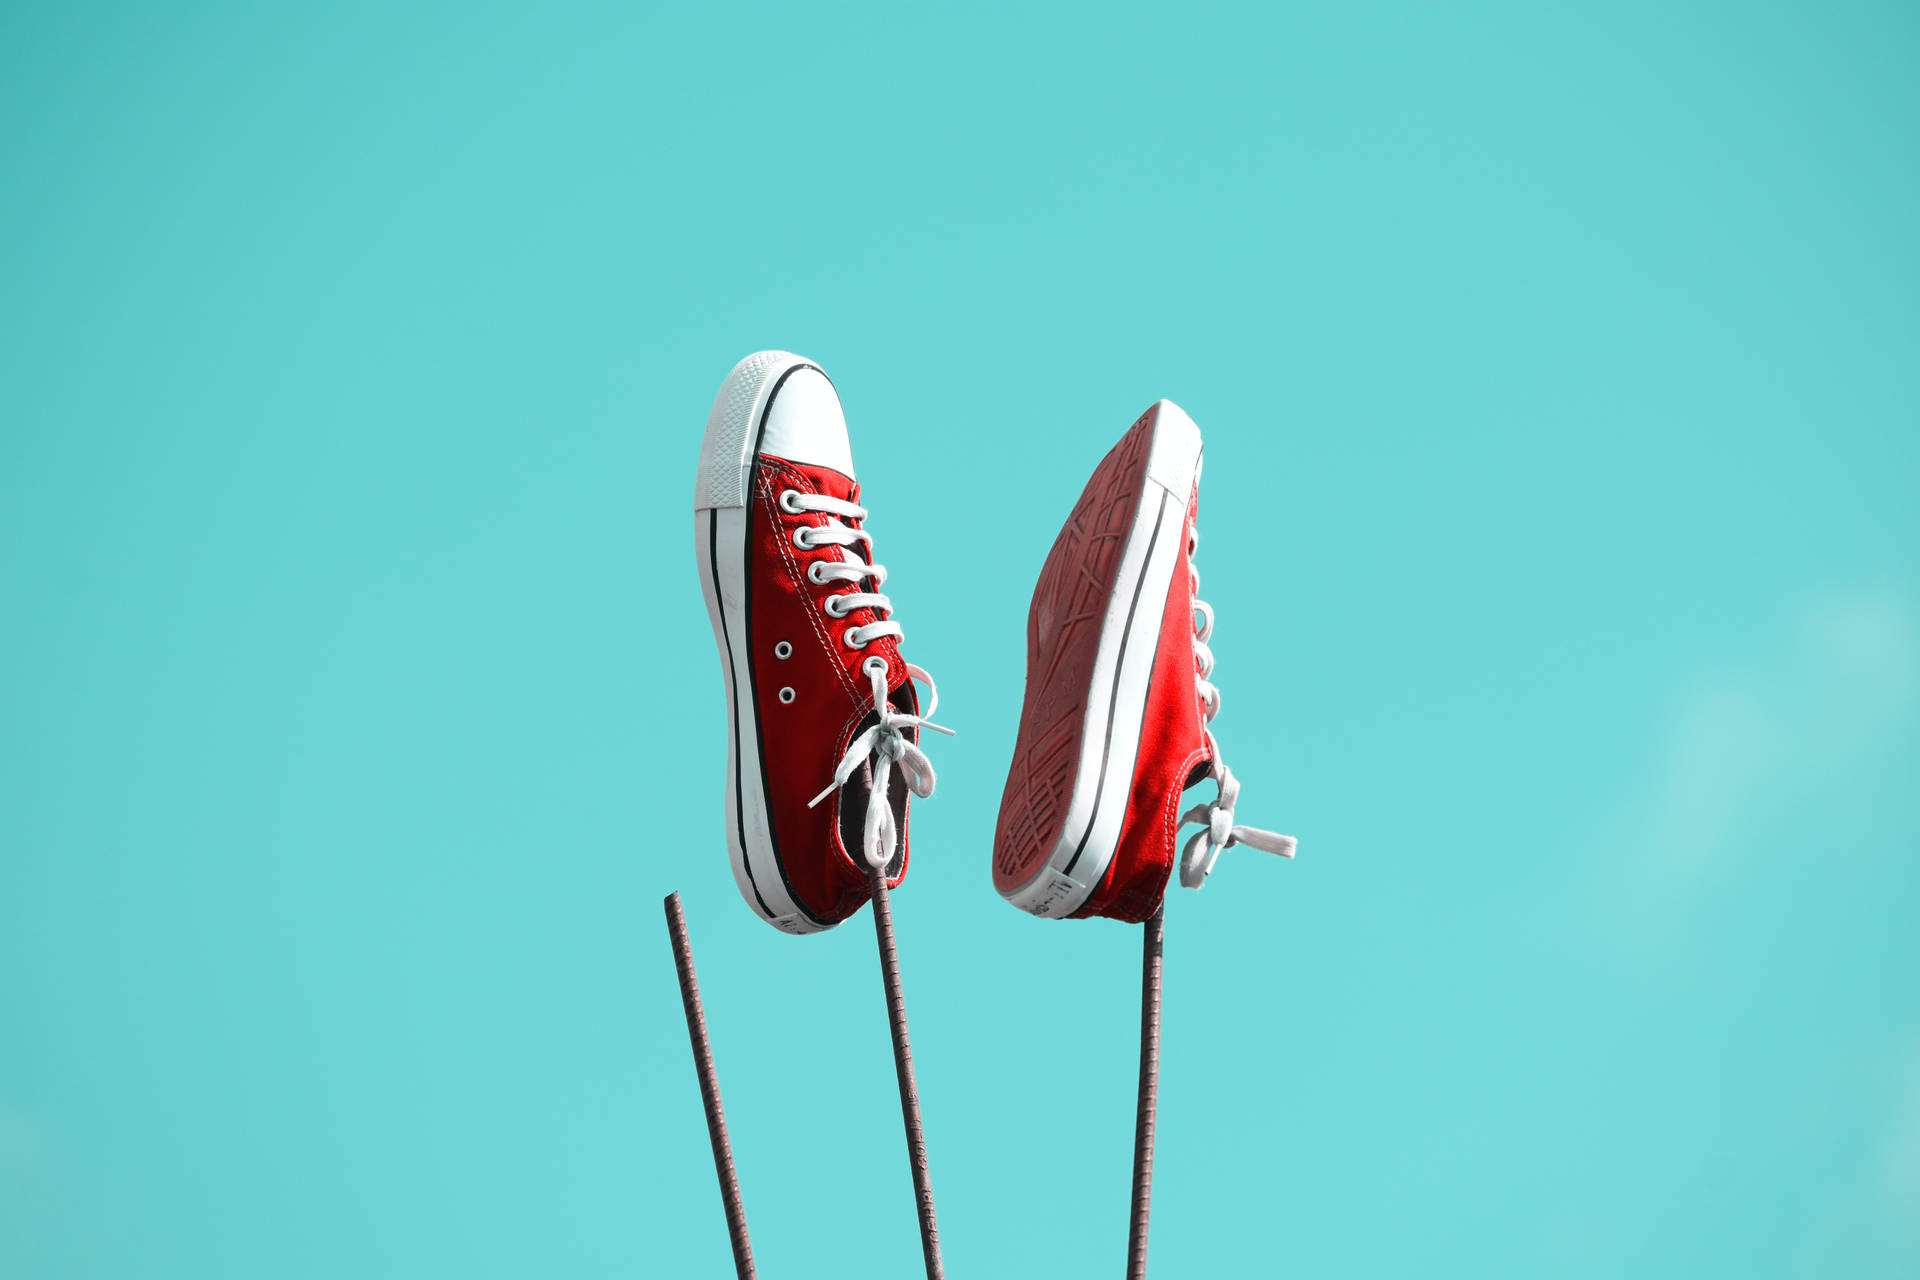 Red Converse Shoes Against Iron Bars Background